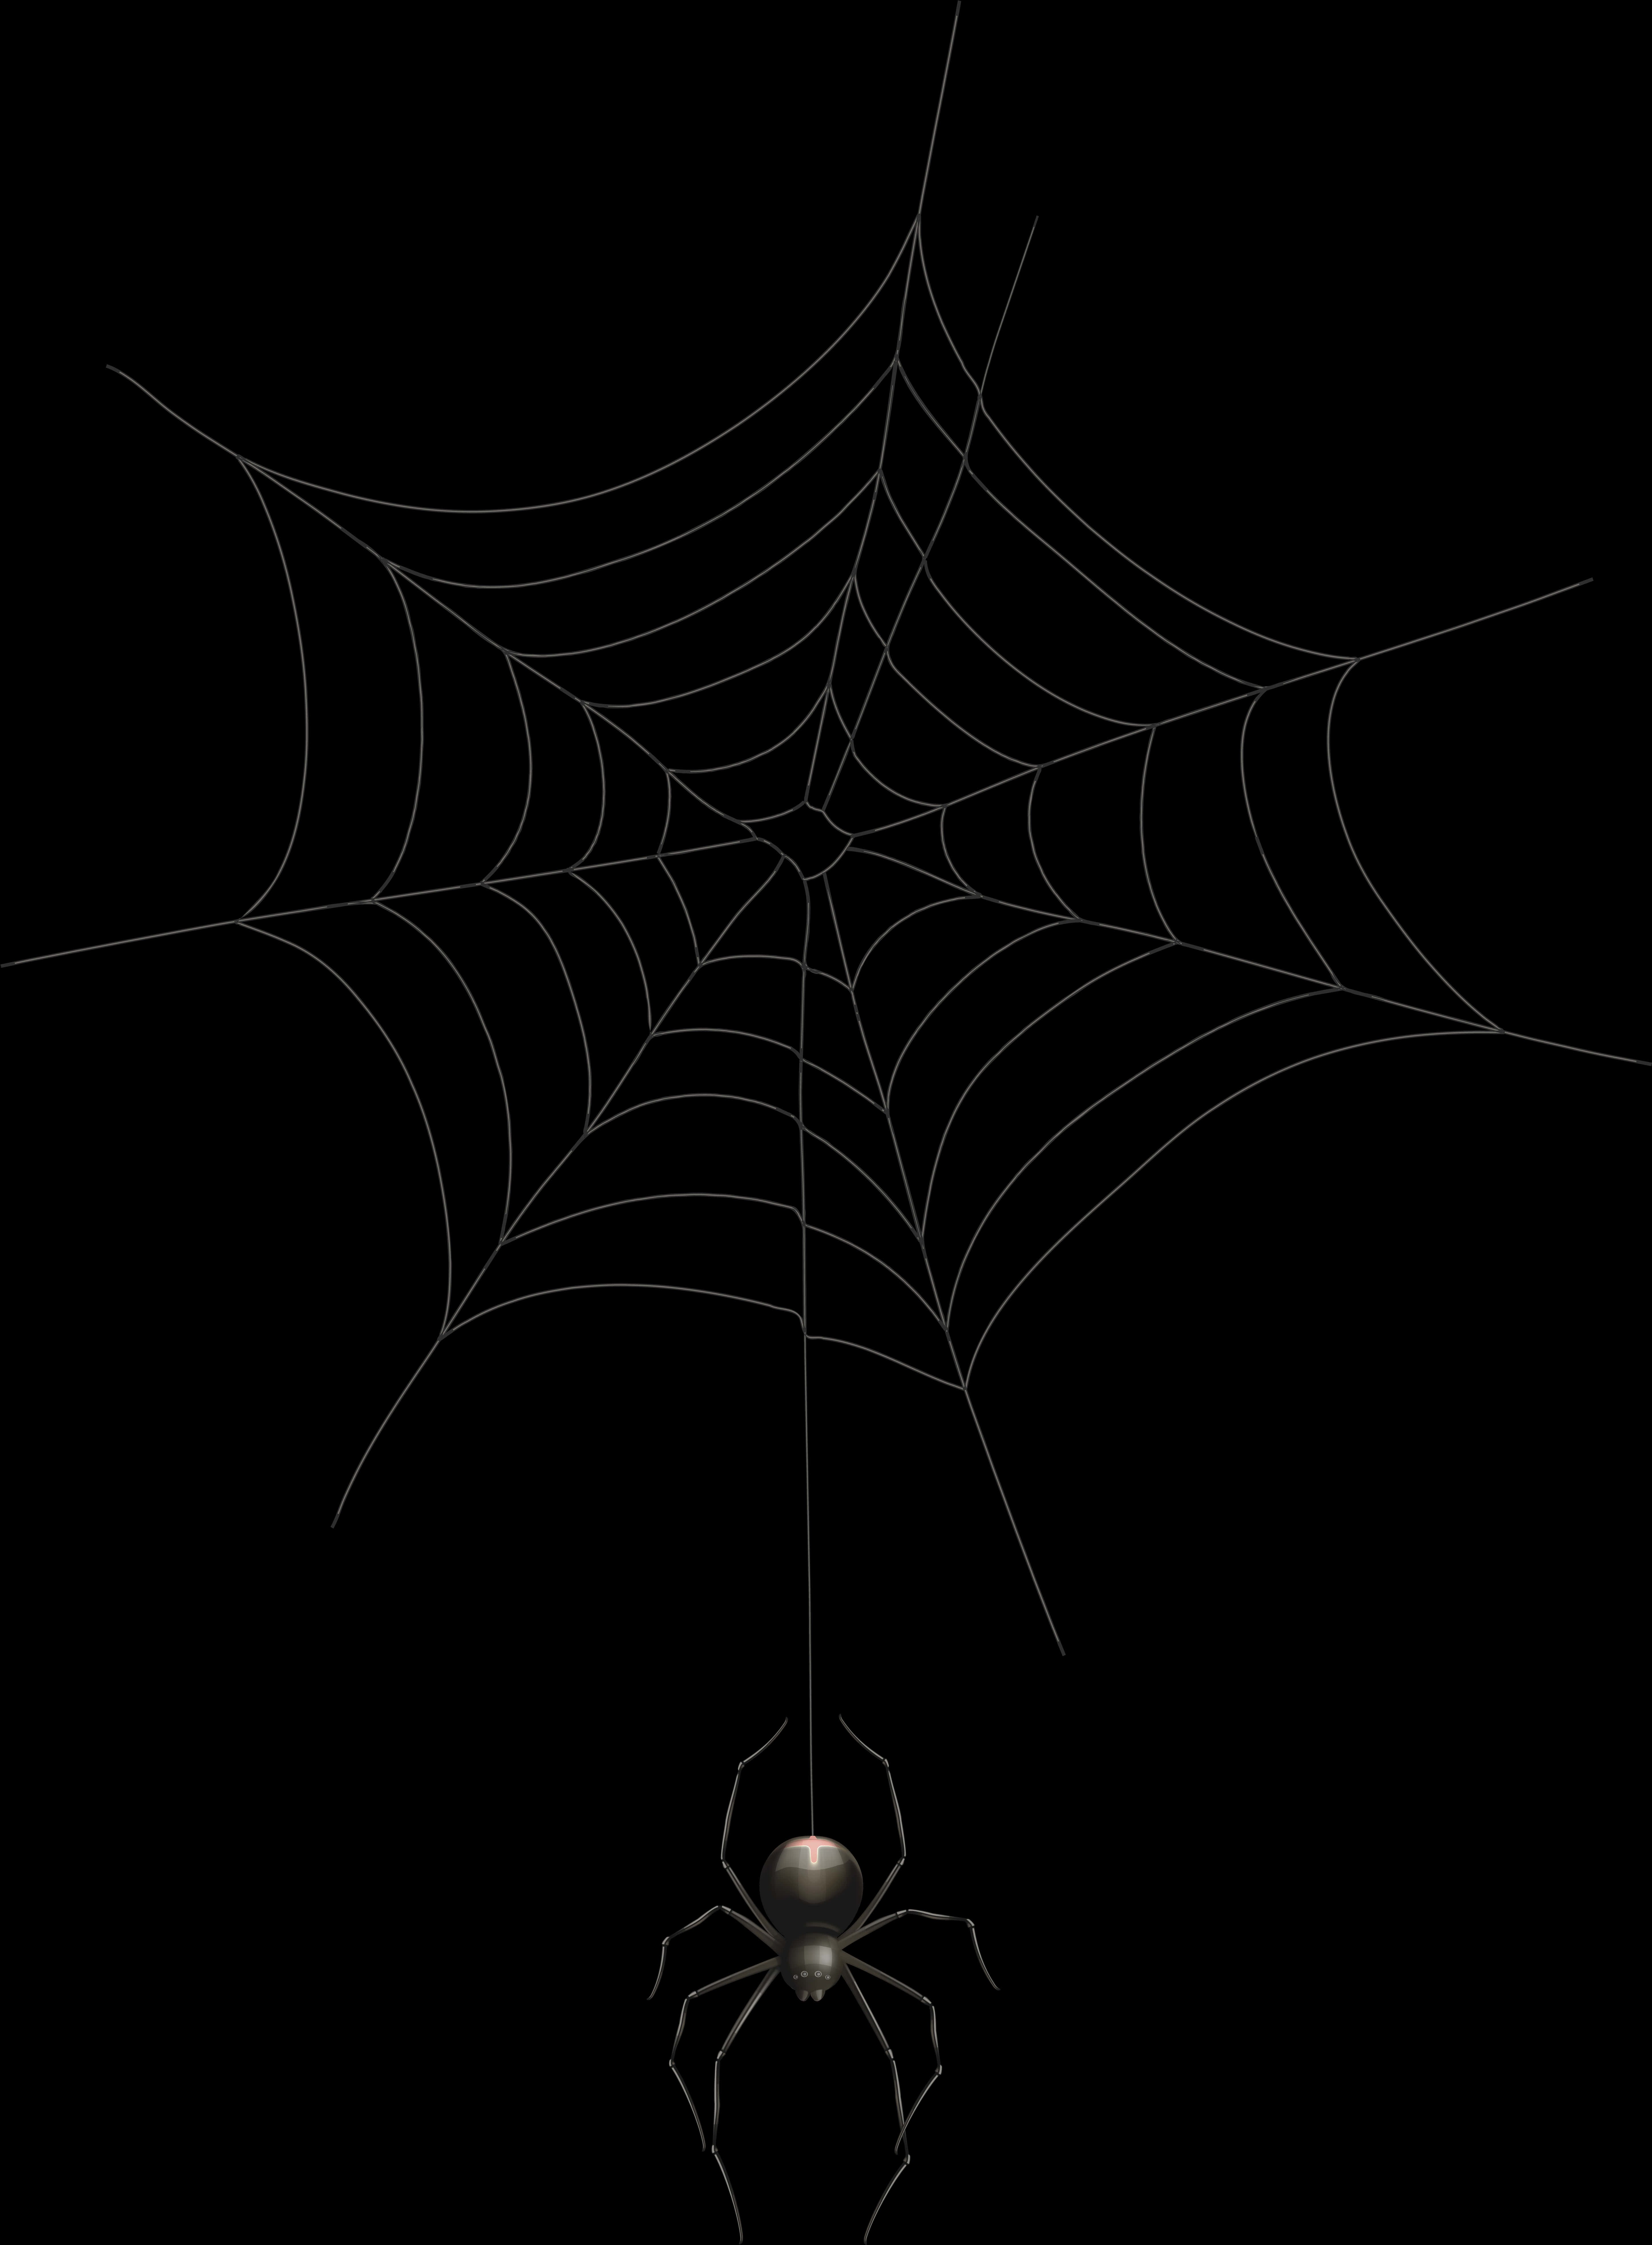 A Spider On A Web